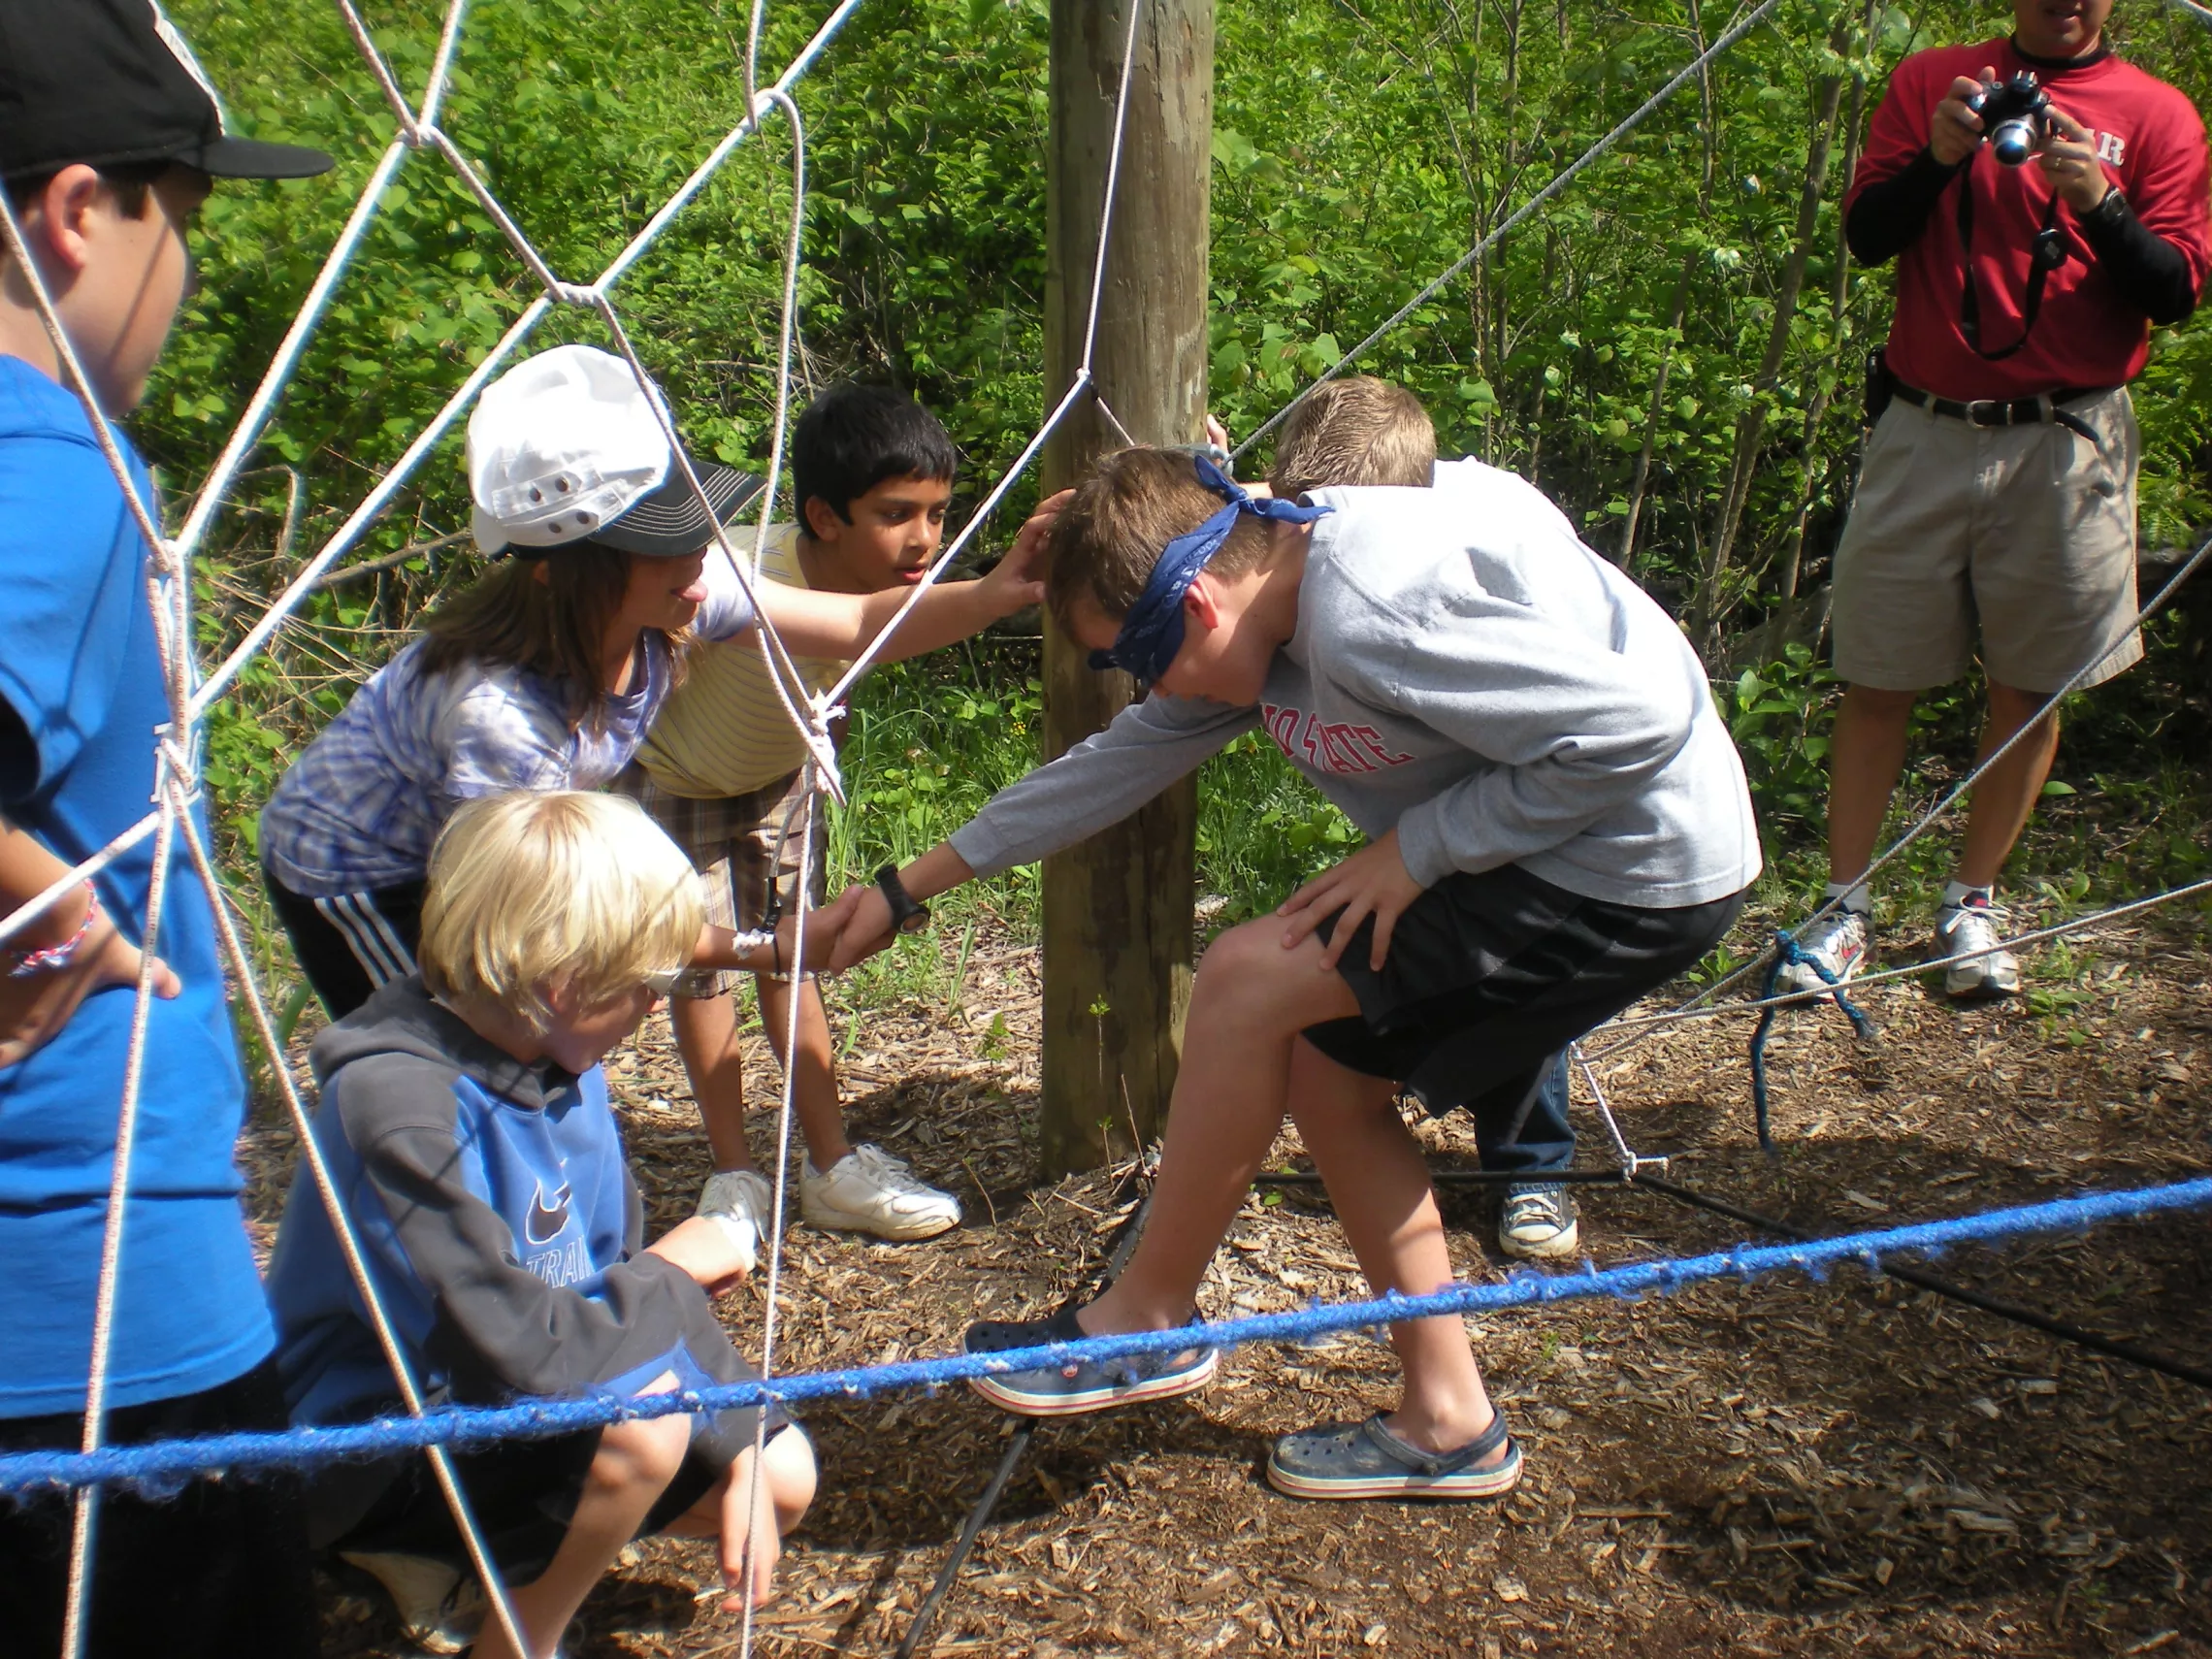 Low Ropes Apr 10 (4)